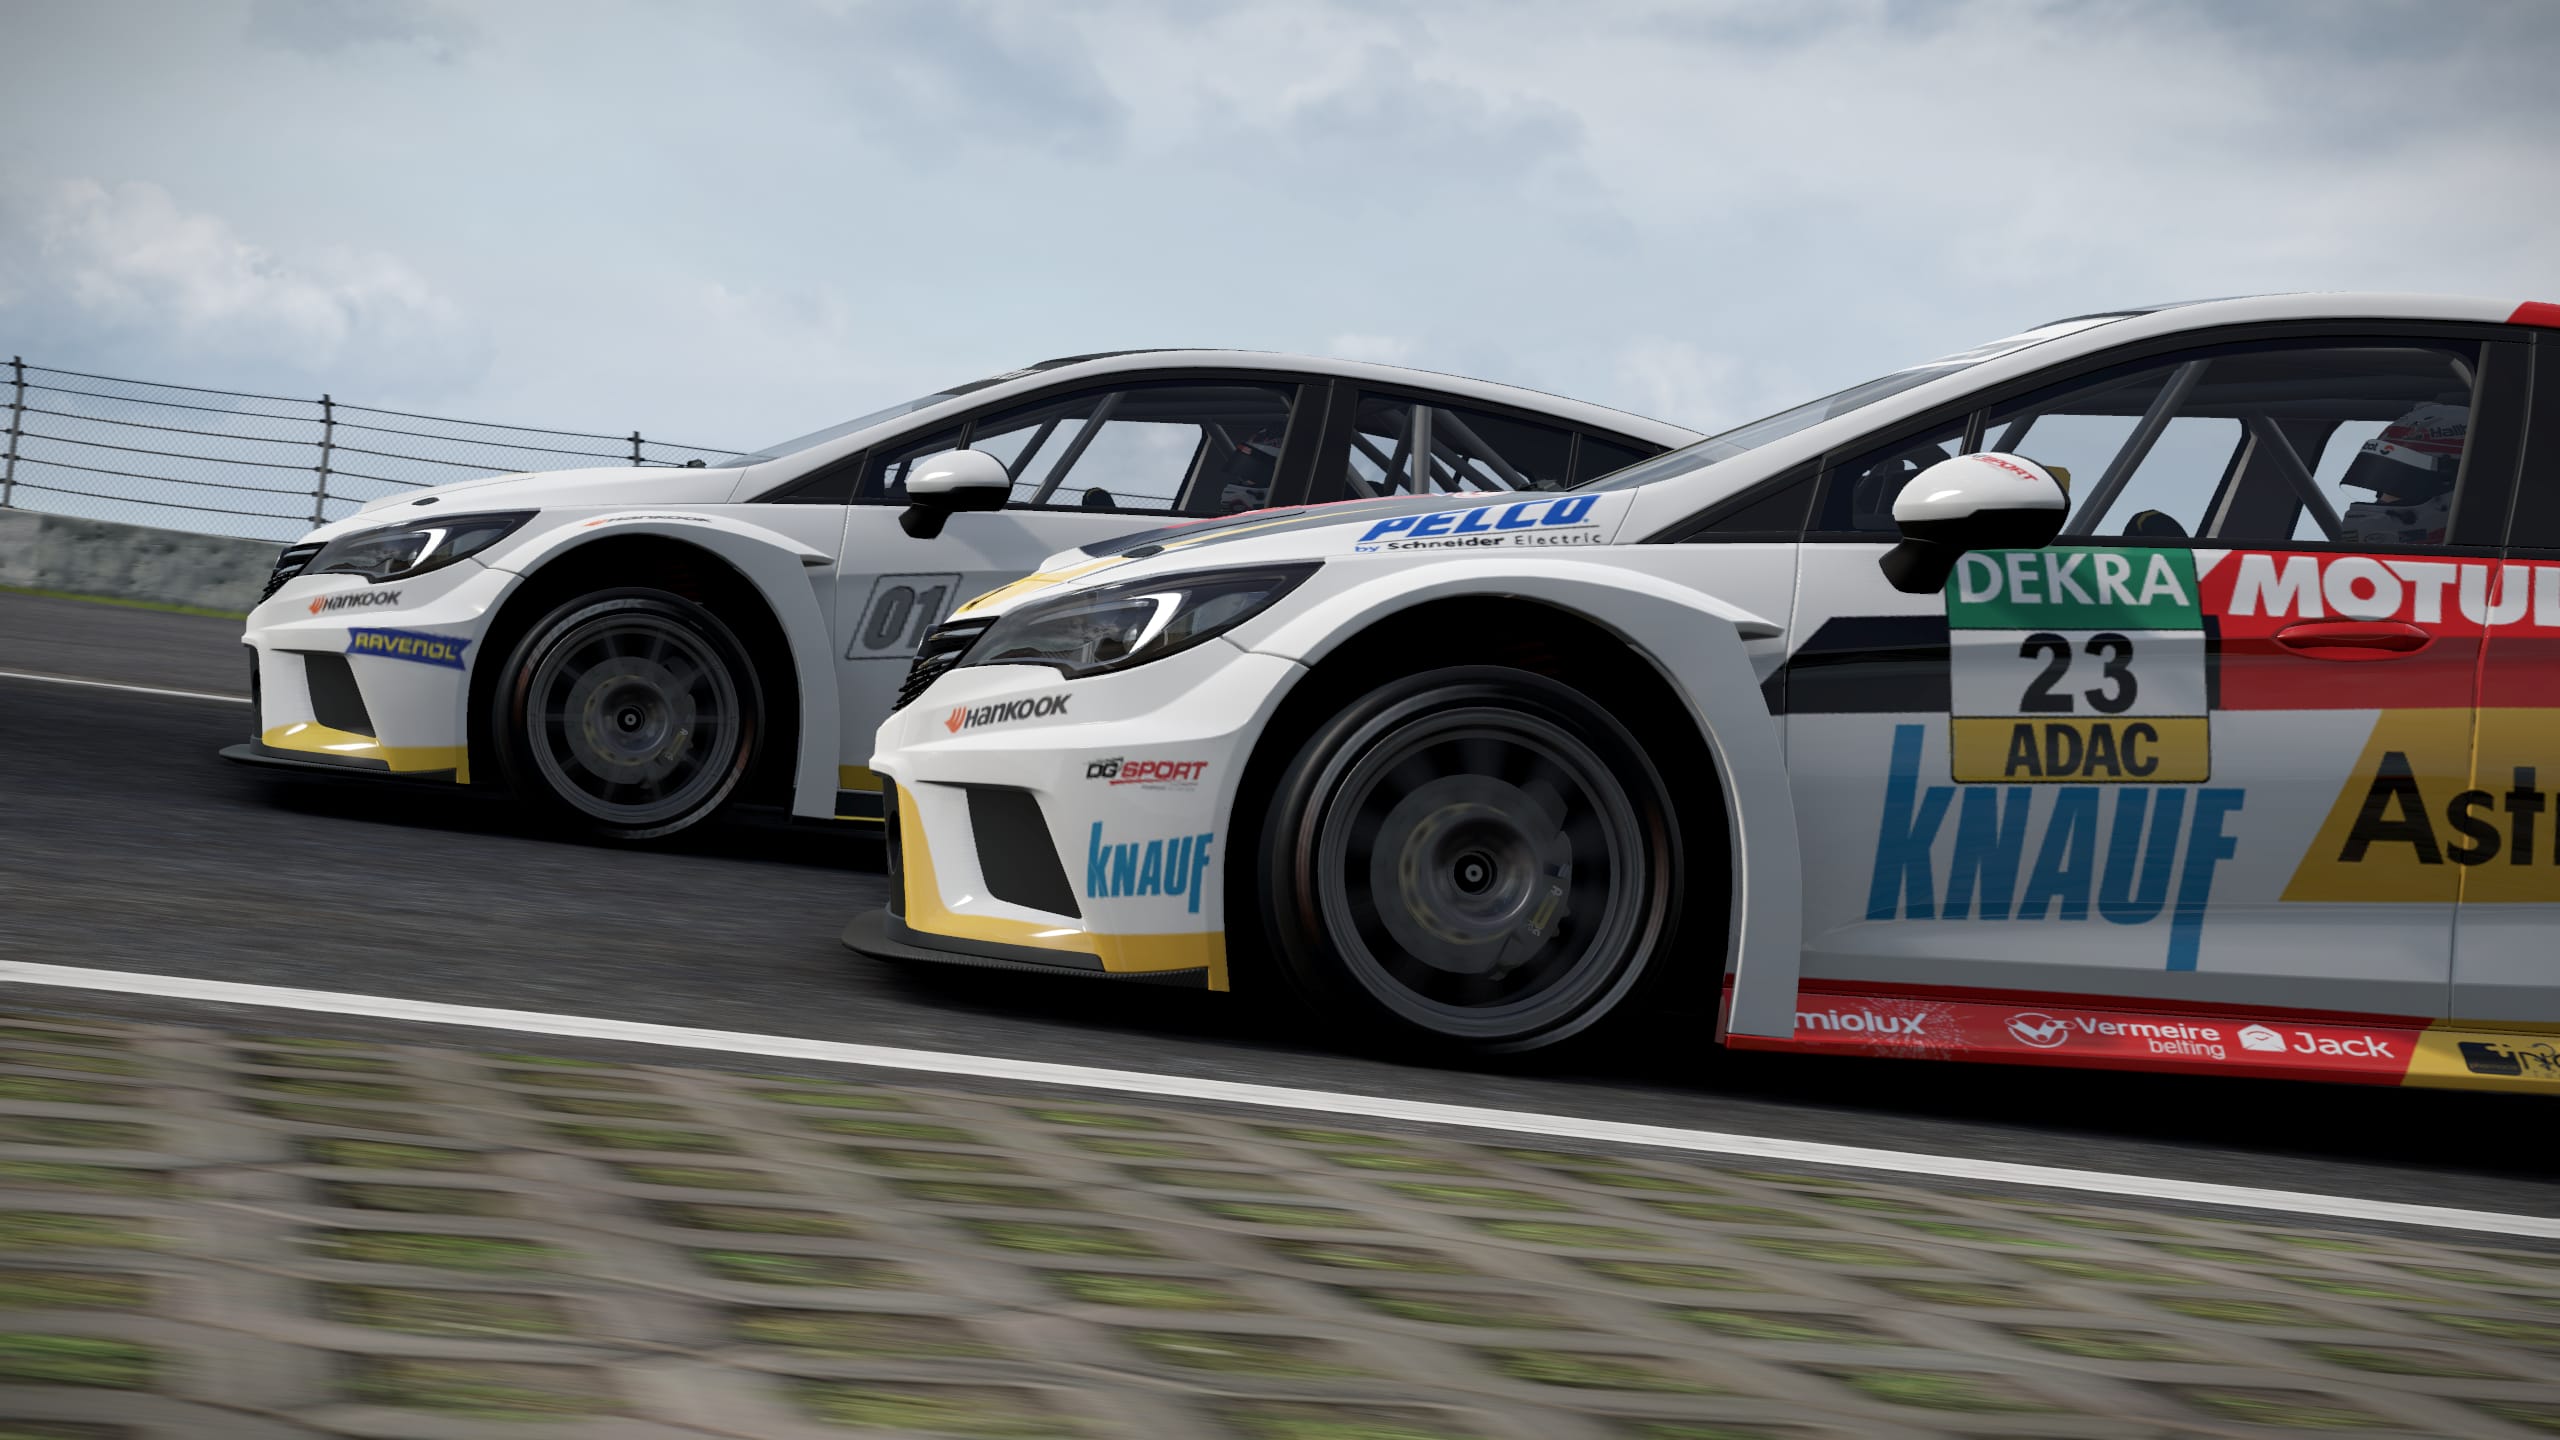 Project CARS Esports - Project CARS 2 - The #1 Racing Esport